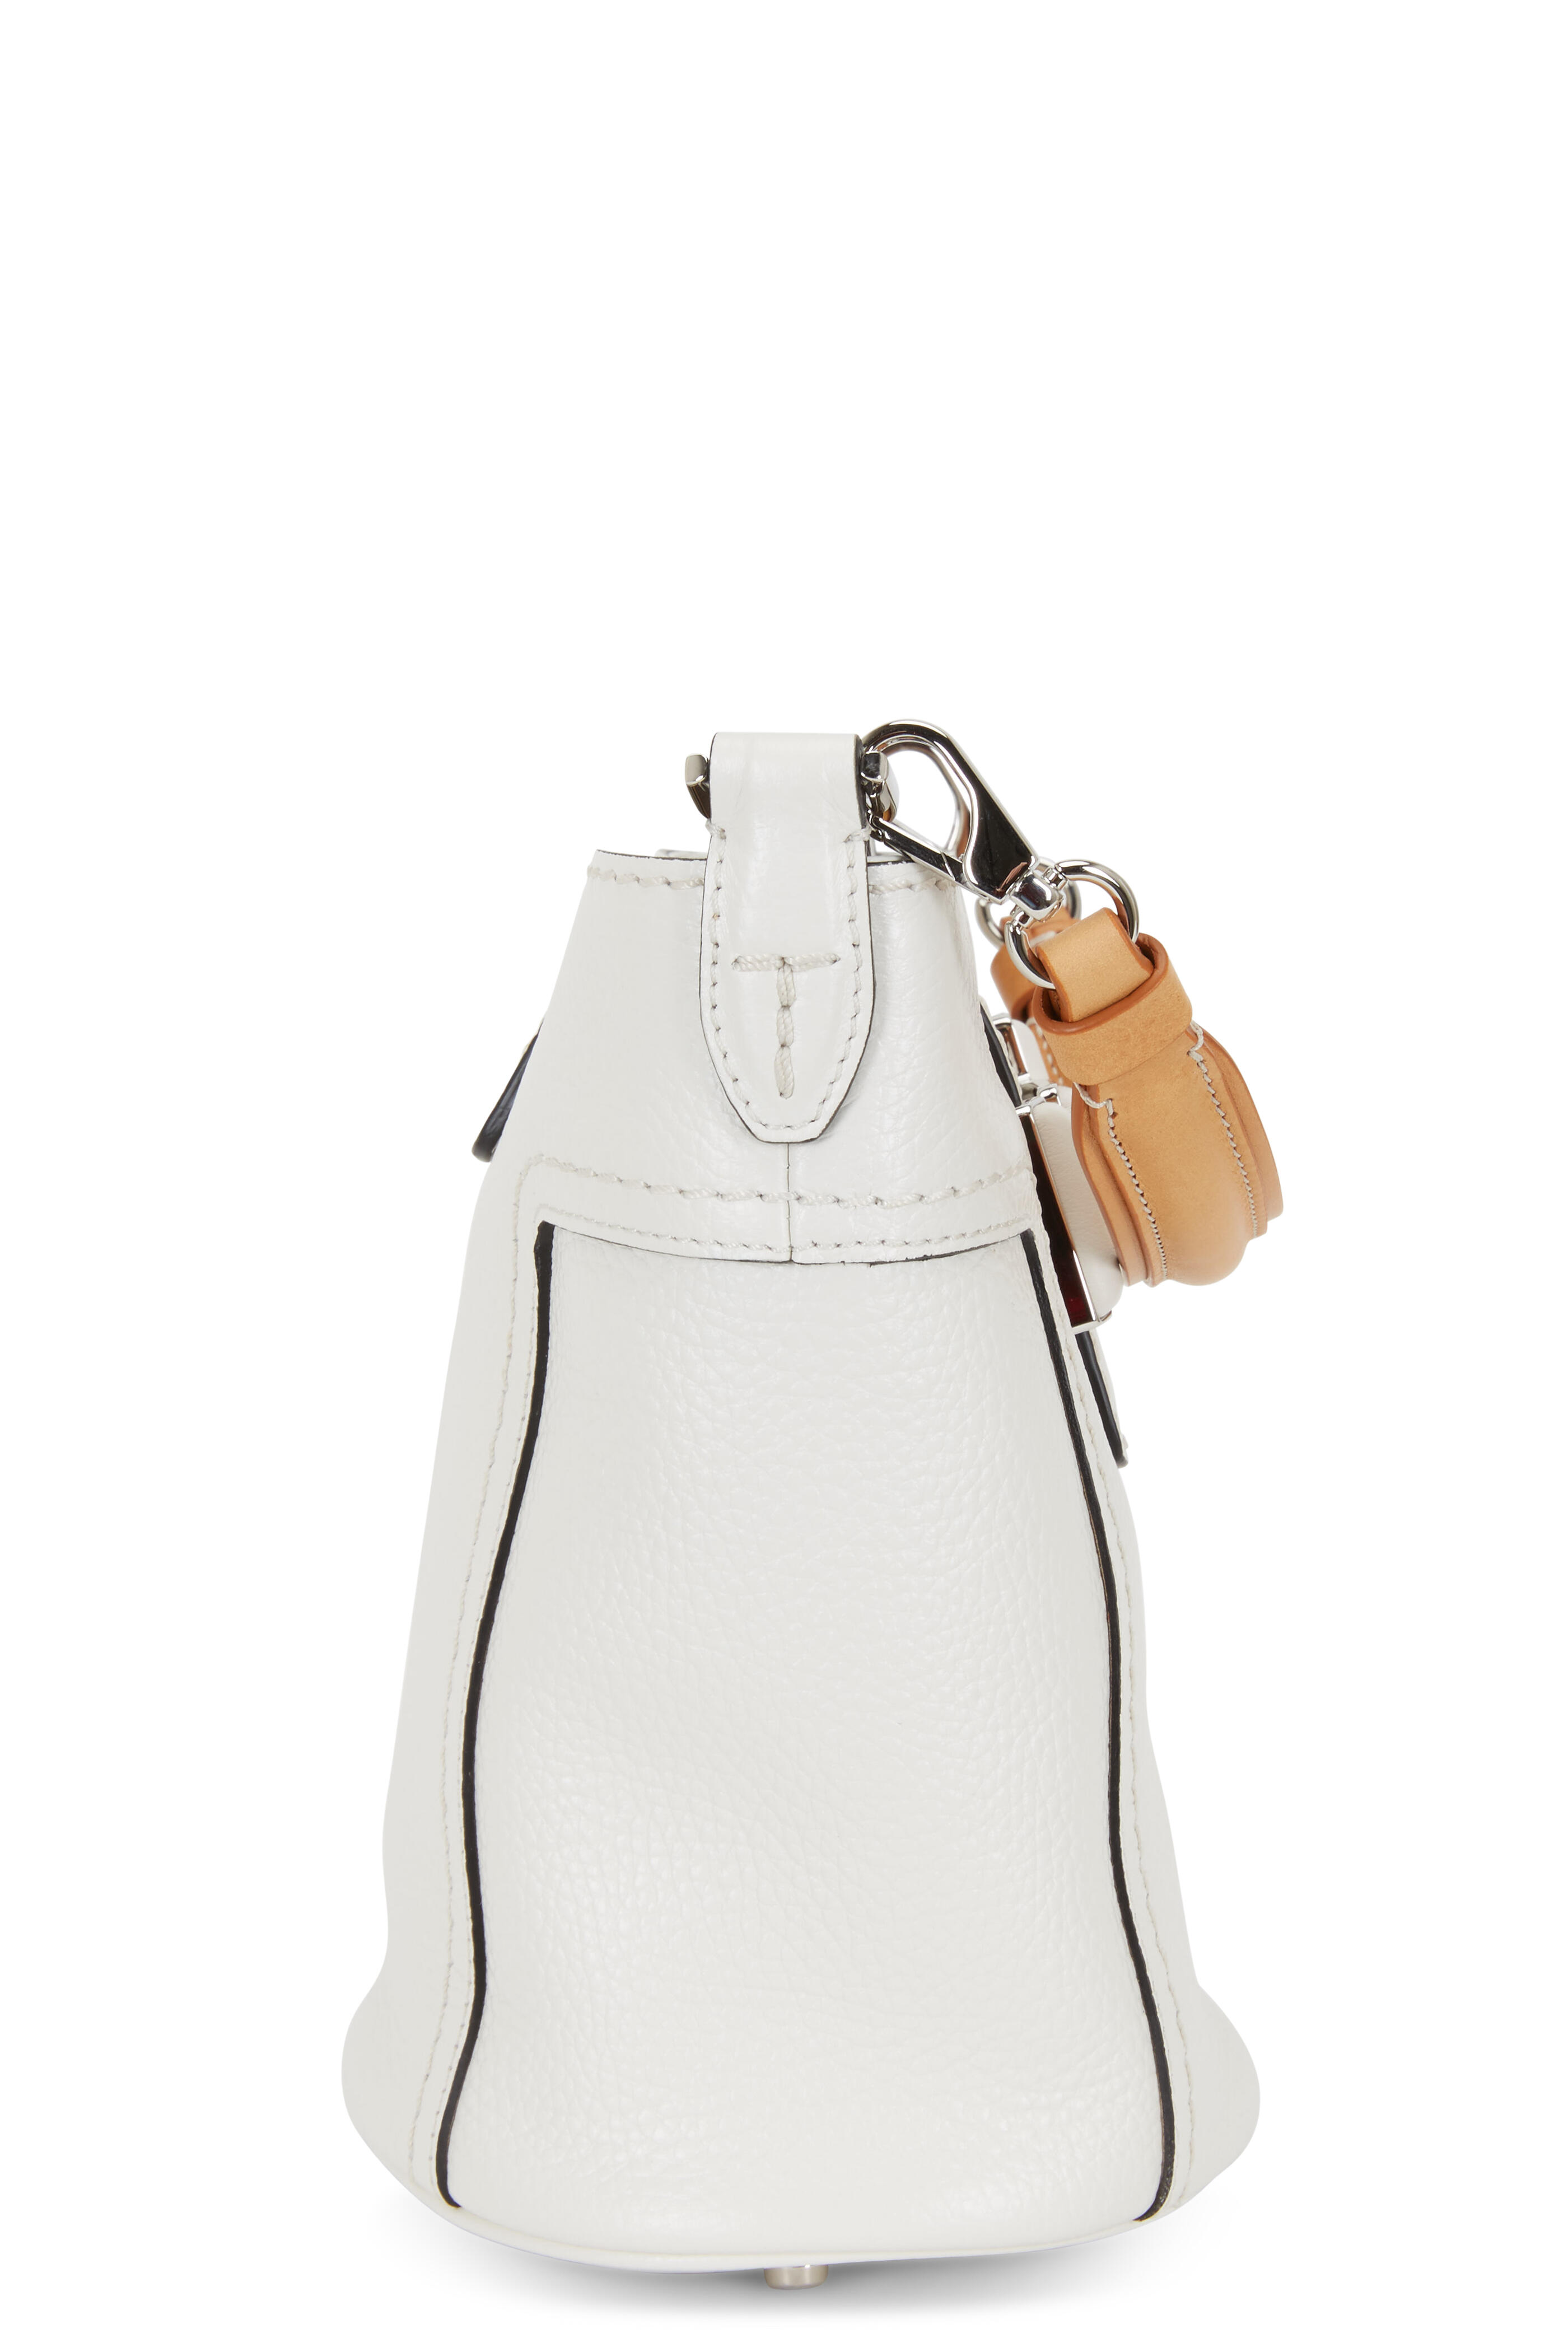 T-Ring Shopping of Tod's - Leather white bag for women